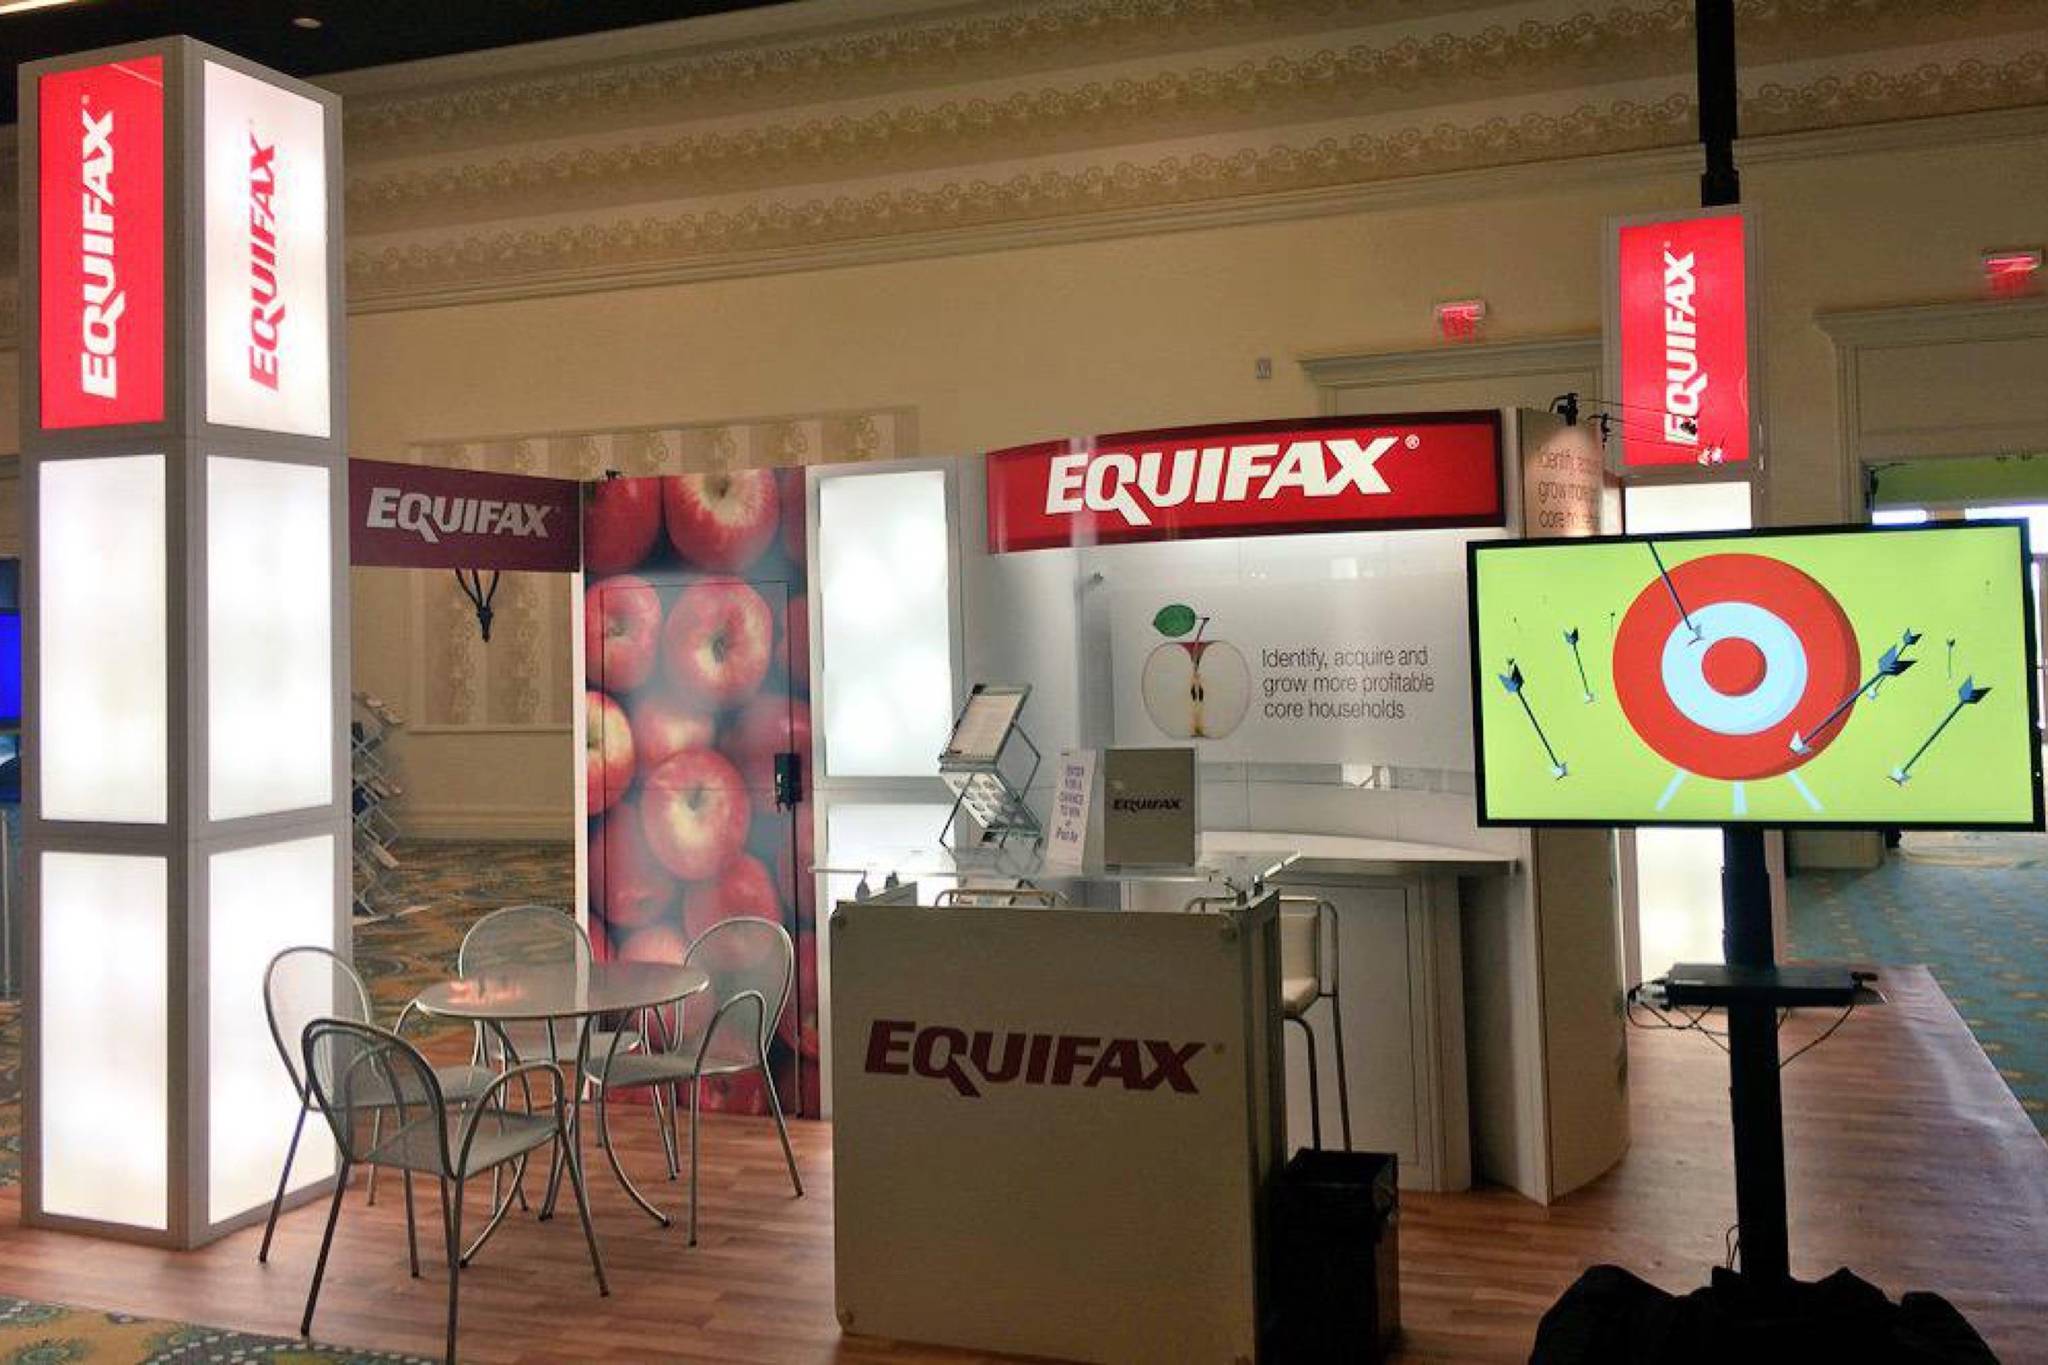 Equifax booth (@Equifax/Twitter)